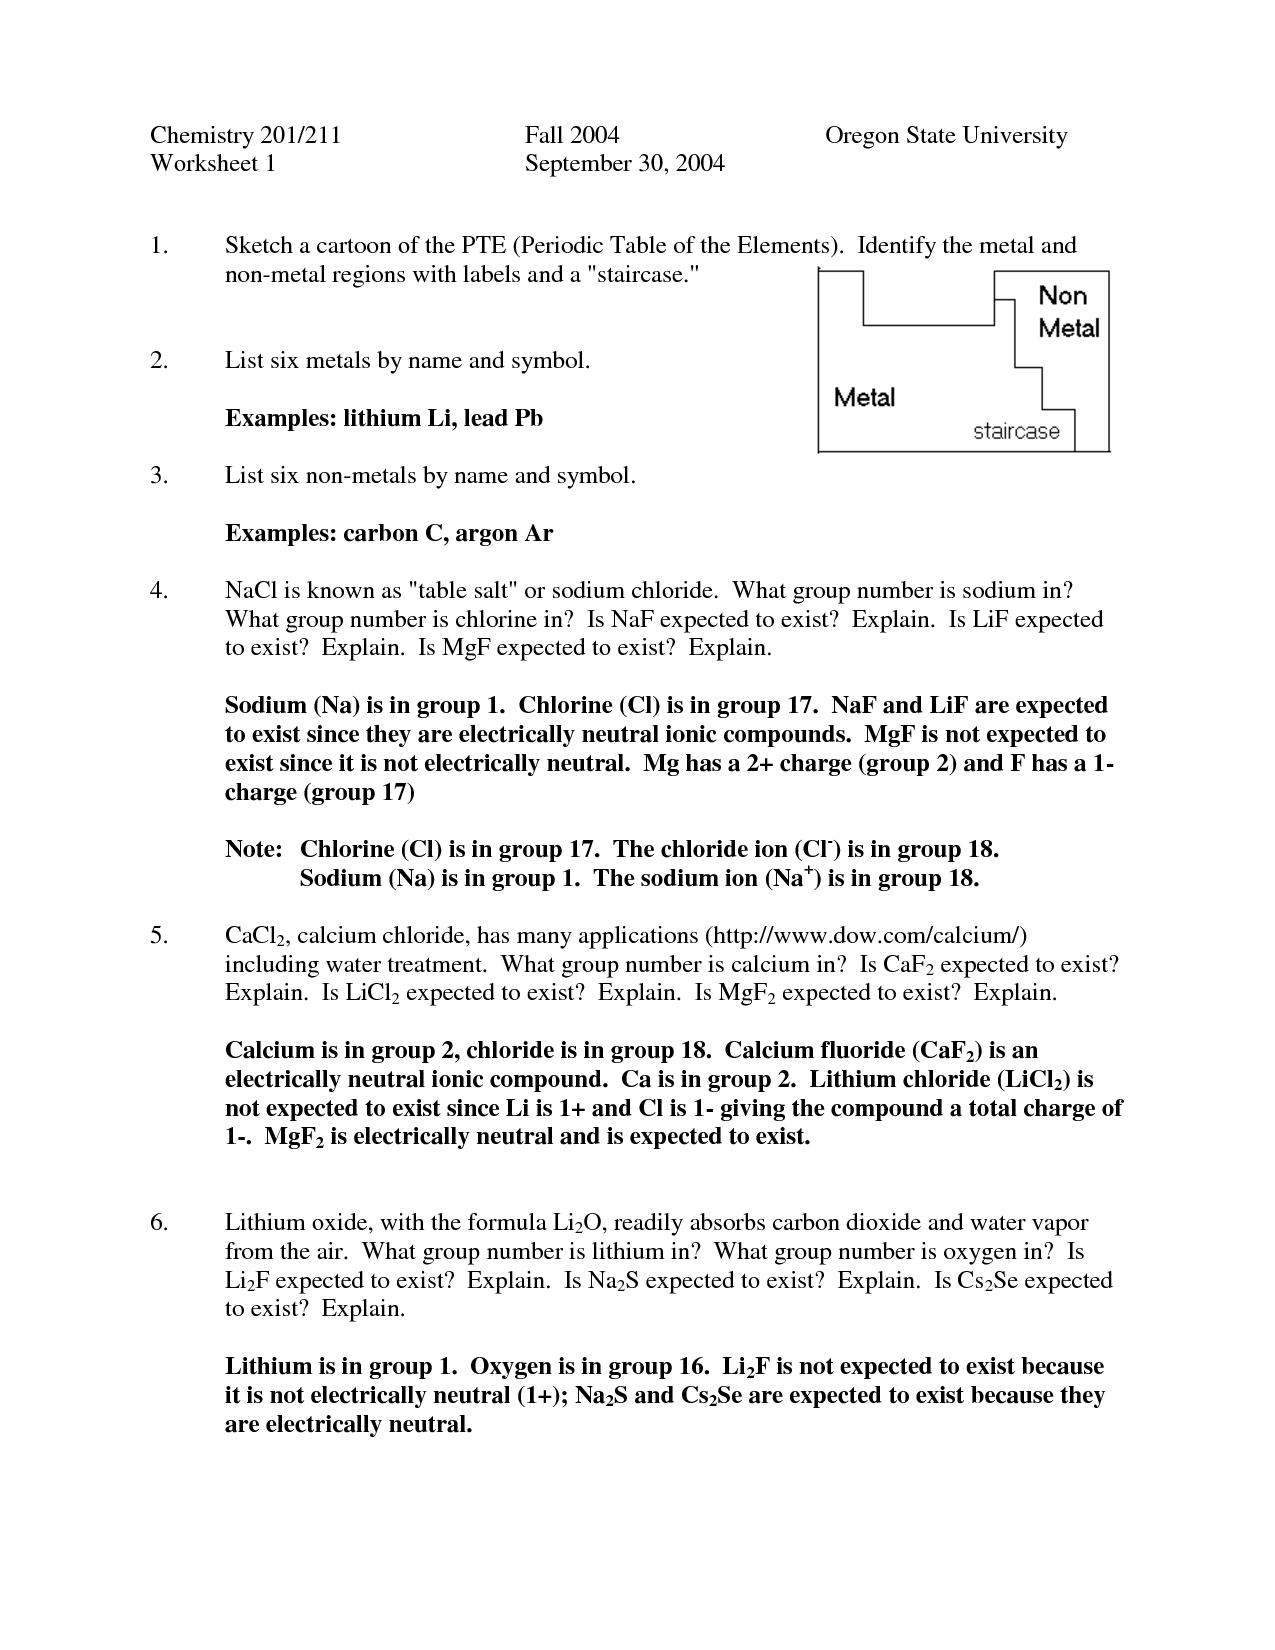 10-best-images-of-chemistry-significant-figures-worksheet-significant